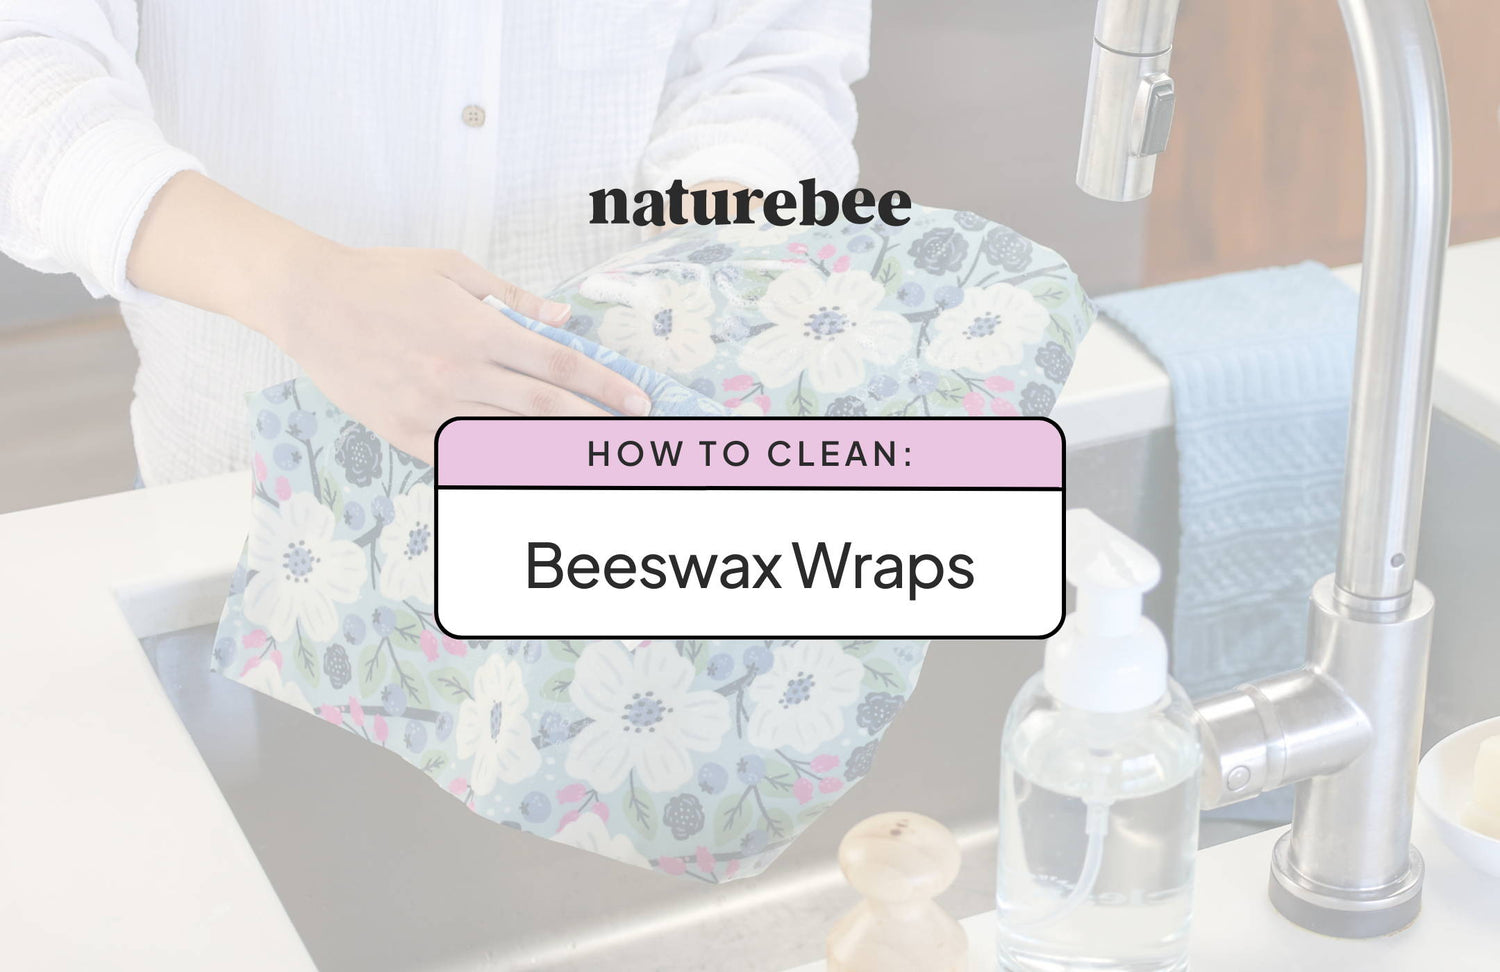 Keep your Beeswax Wraps Sparkling! A Refreshing Guide to Easy Cleaning